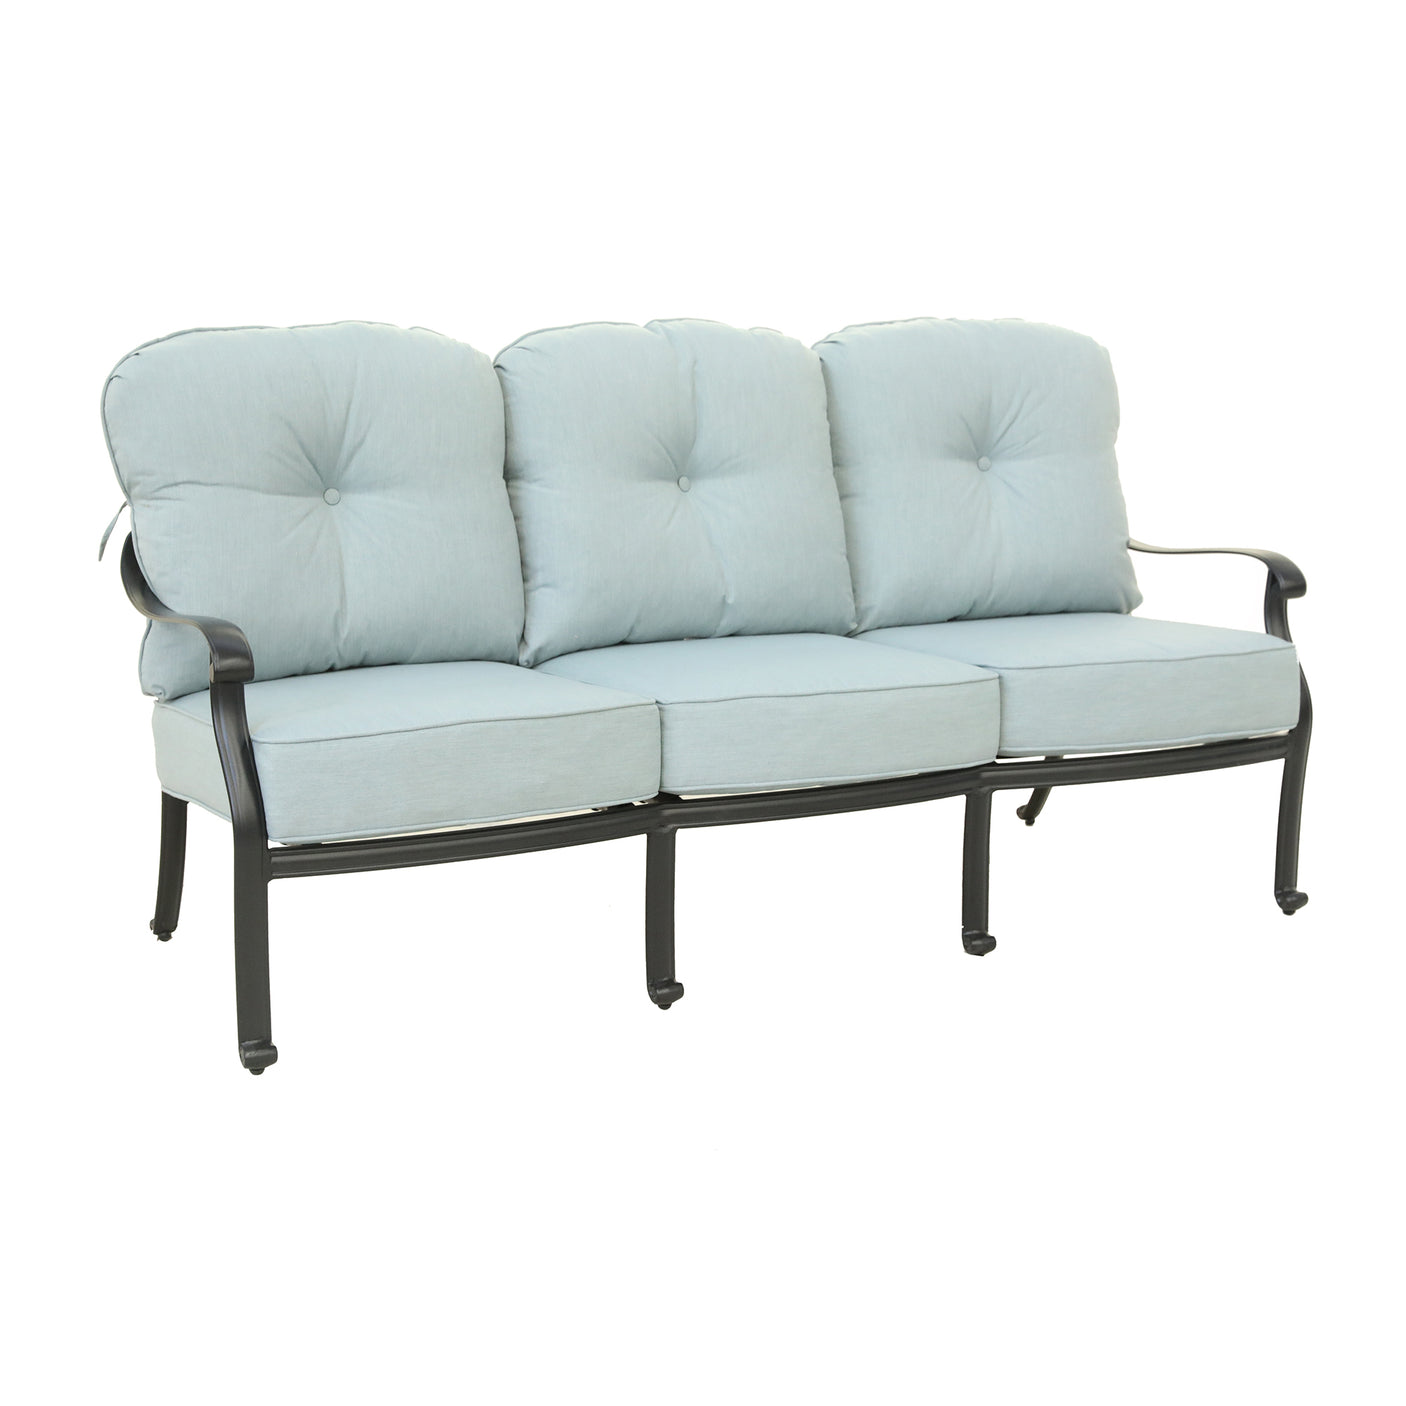 5 Piece Sofa Seating Group with Cushions, Light Blue